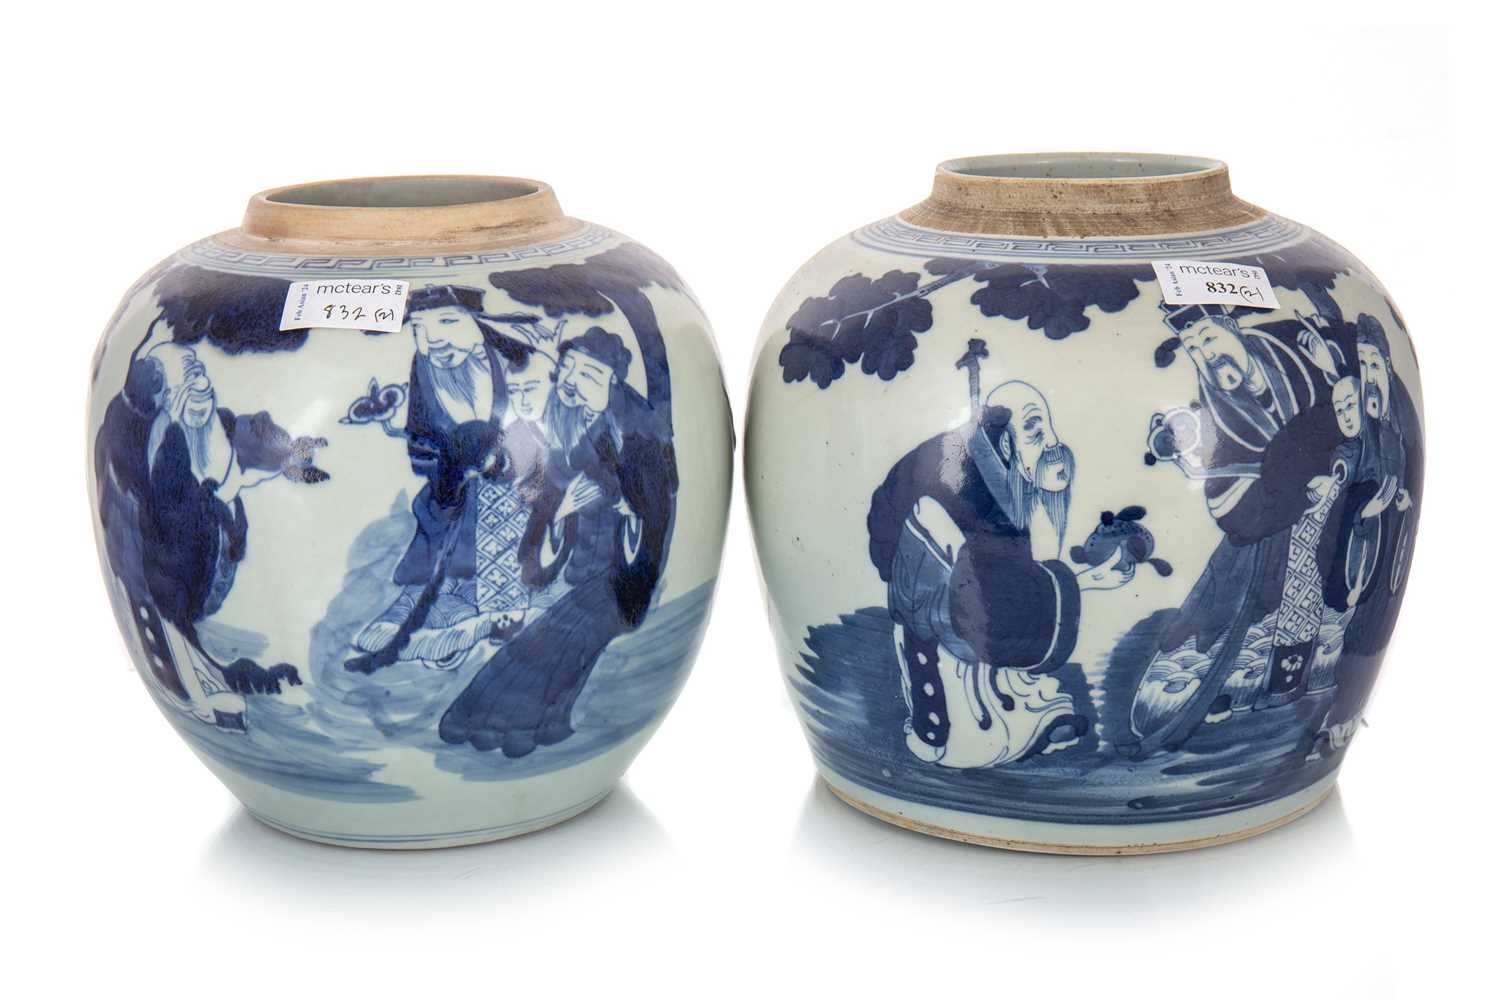 NEAR PAIR OF CHINESE BLUE AND WHITE GINGER JARS, LATE 18TH CENTURY